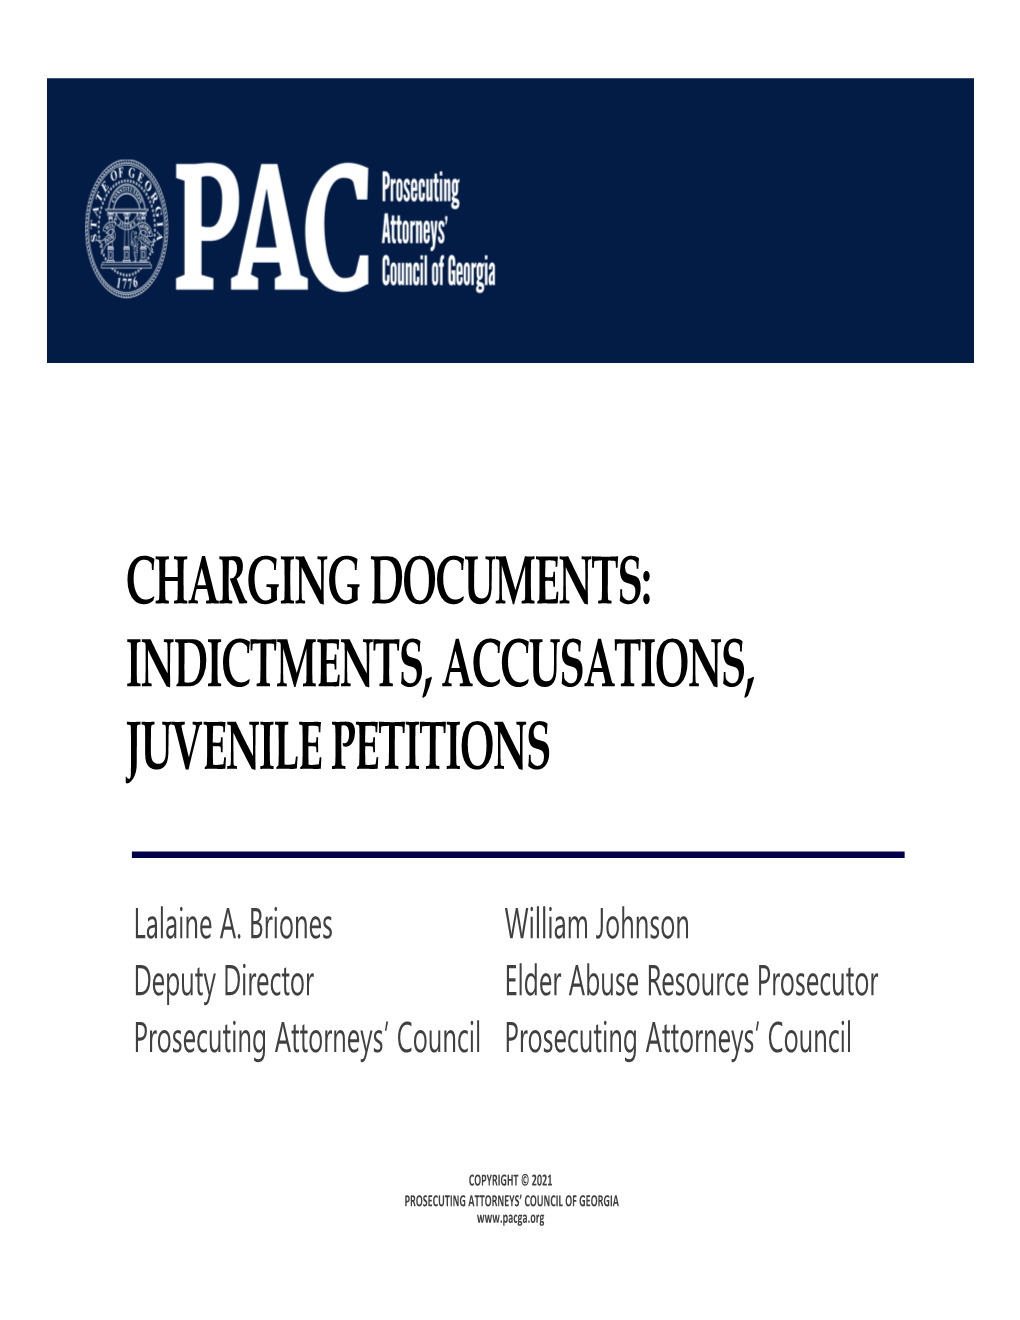 Charging Documents: Indictments, Accusations, Juvenile Petitions